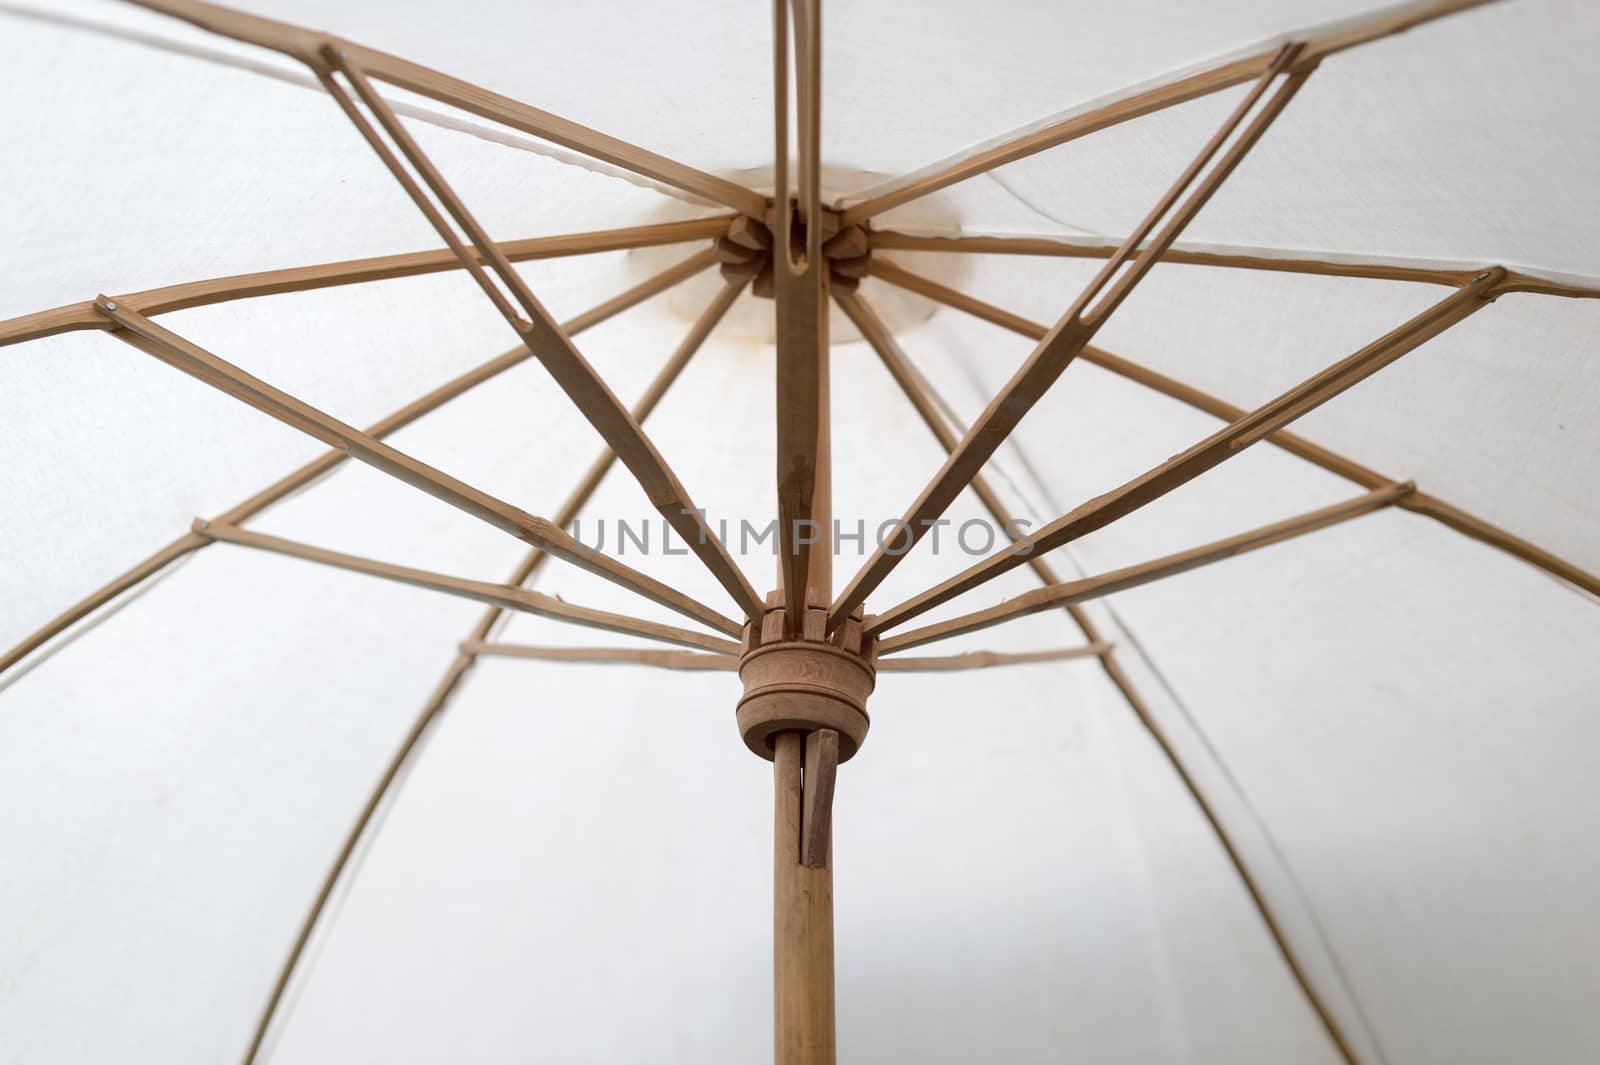 Closeup of fabric umbrella with bamboo frame assemble by sayhmog